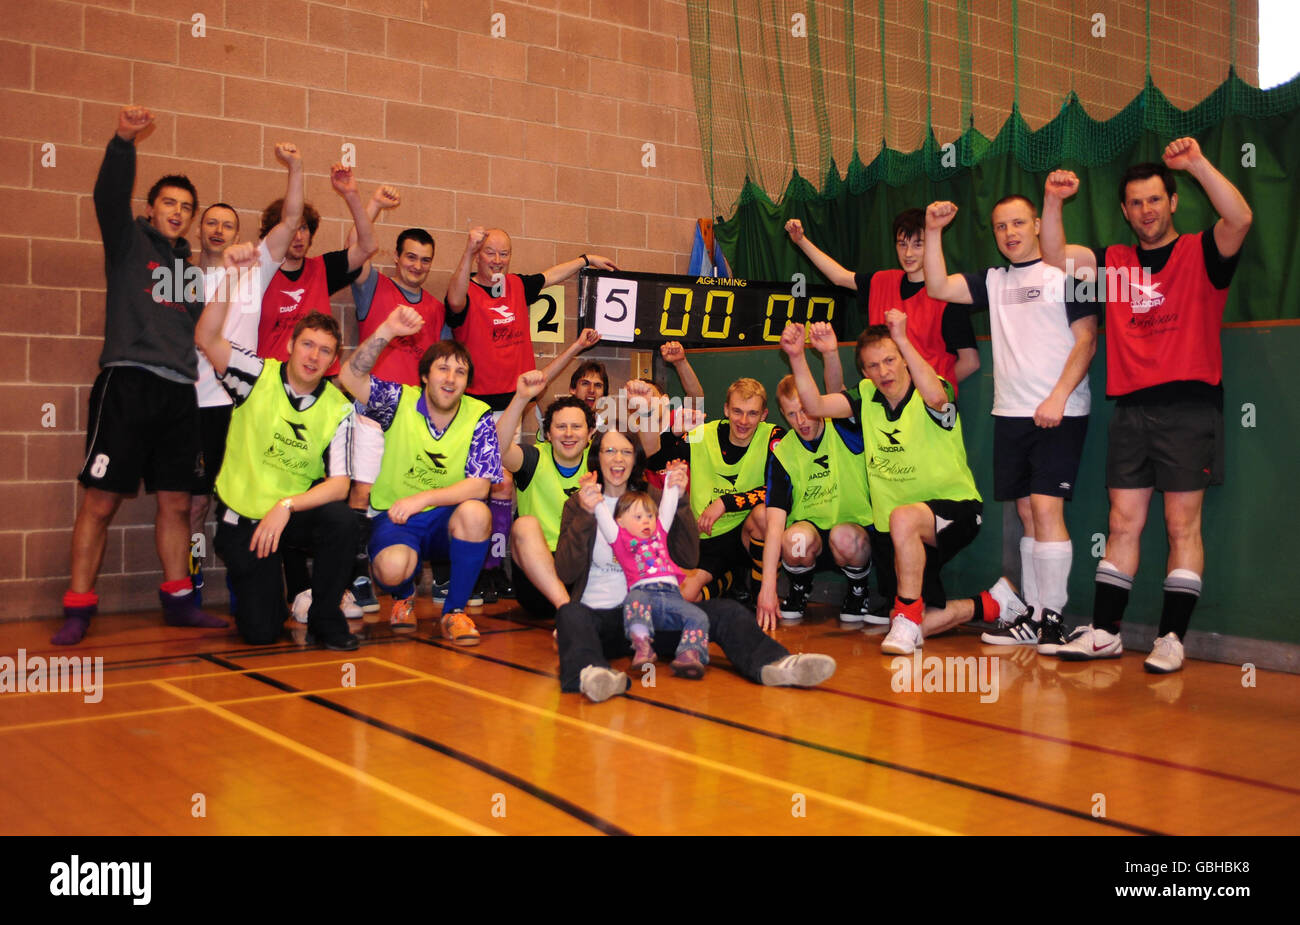 Andrea Arnold sits with her Daugther Zoe in front of the Lionhearts including Jon Arnold (Behind Andrea to the left) and Bravehearts after they successfully set a new Five-A-Side football World record at 25 hours exactly to raise money for the Children's Heart Surgery Fund at Leeds General Infirmary where Zoe received treatment. The record was set at the Leeds University Sport Hall, Leeds. Stock Photo